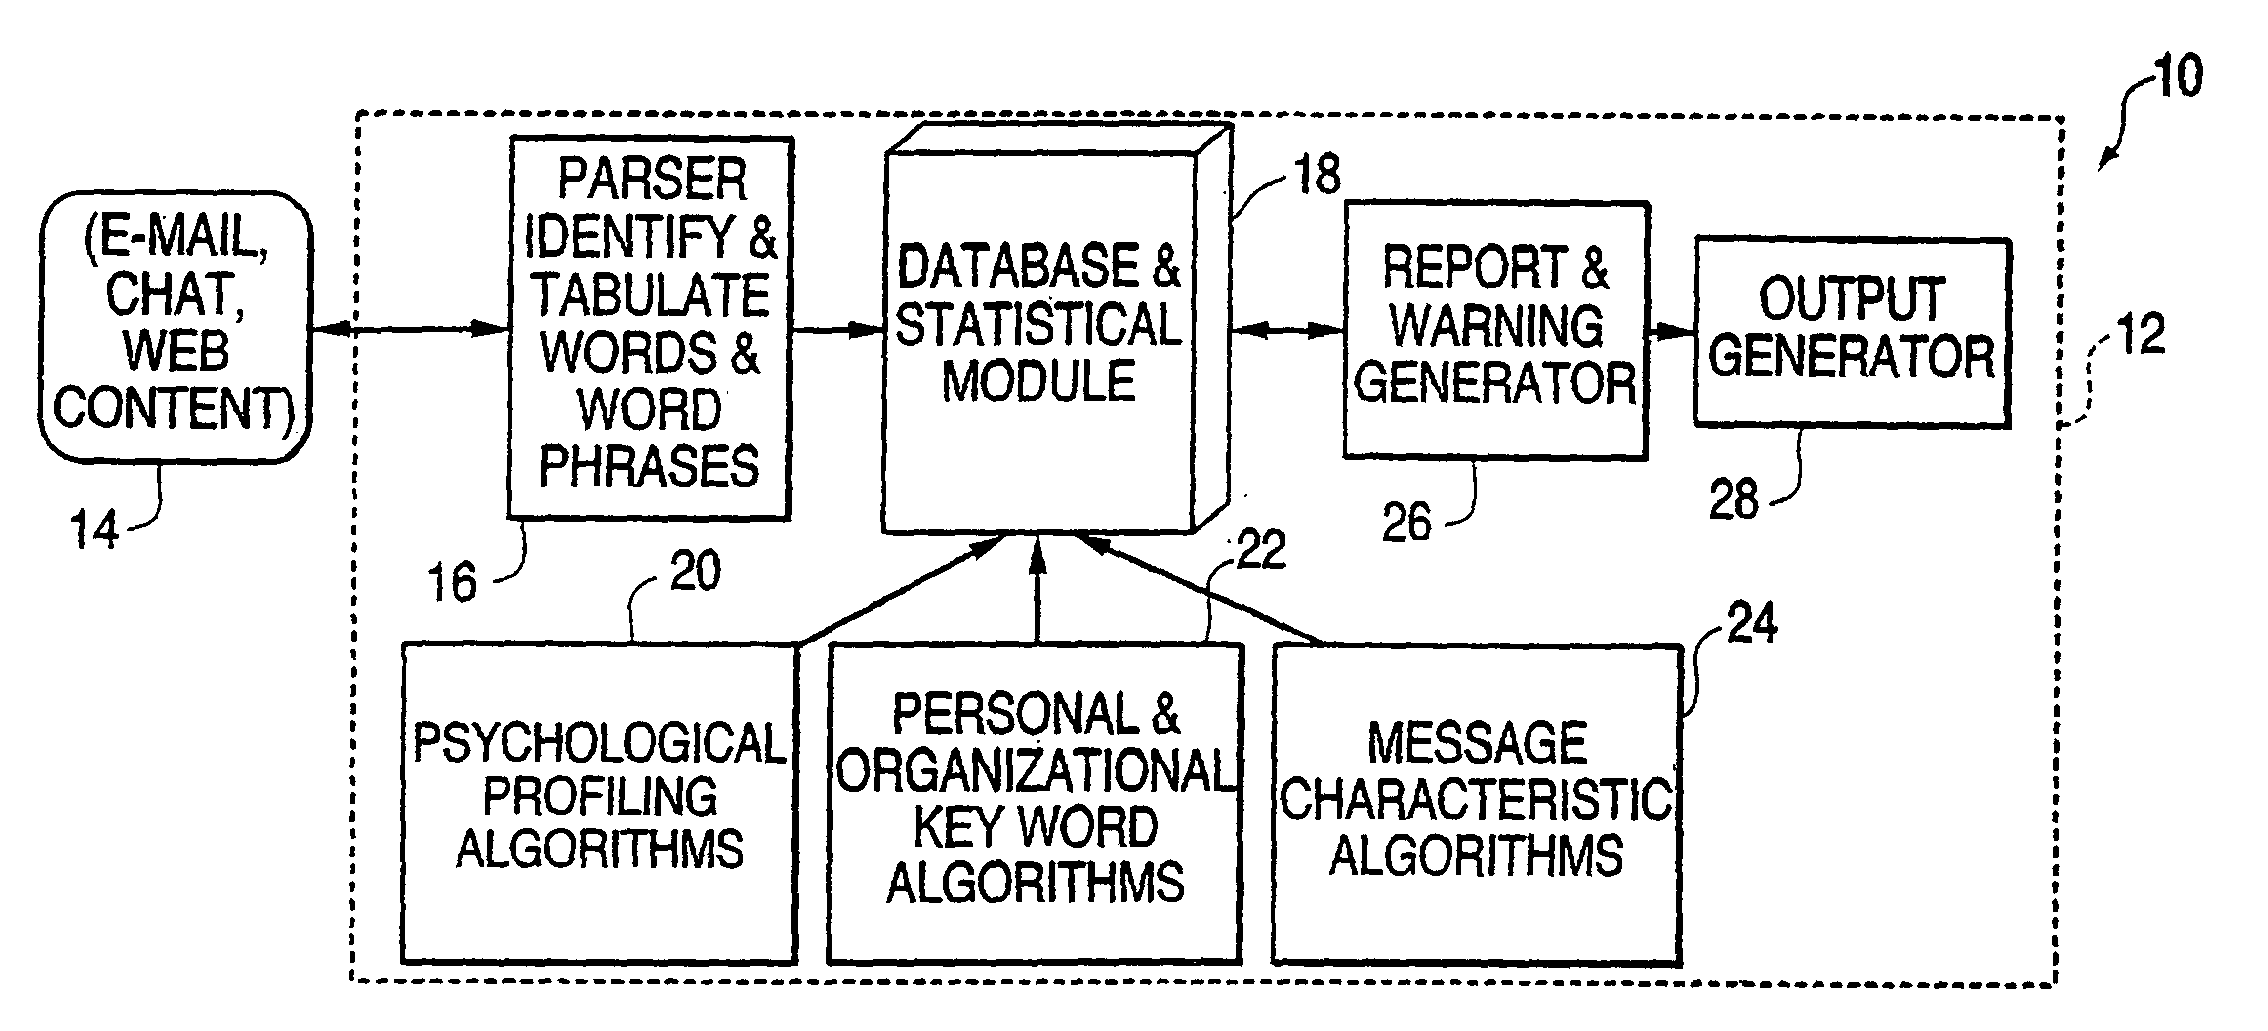 System and method for computerized psychological content analysis of computer and media generated communications to produce communications management support, indications, and warnings of dangerous behavior, assessment of media images, and personnel selection support